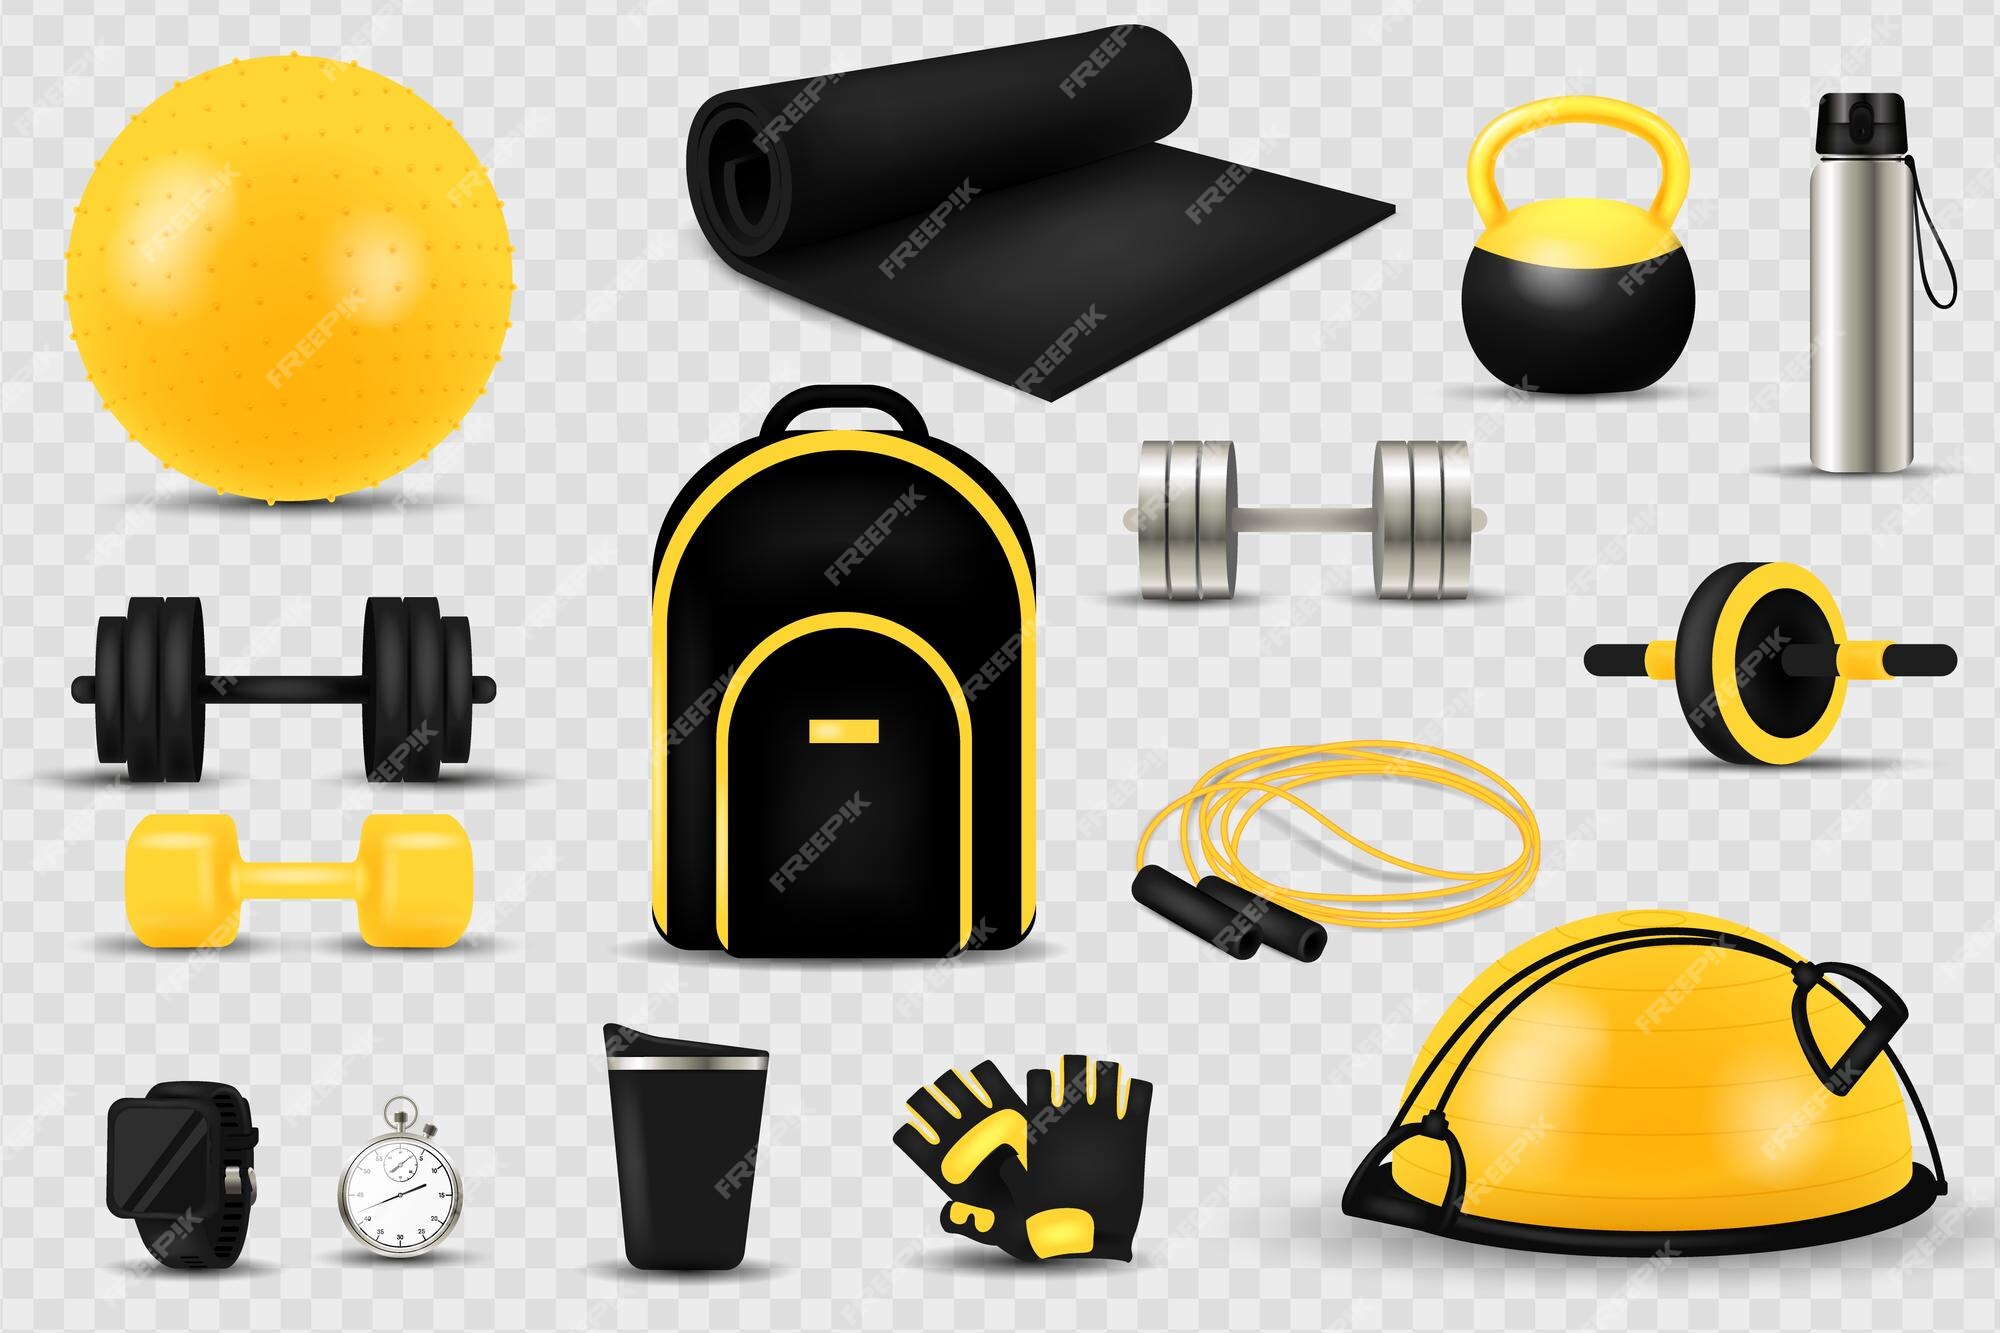 https://img.freepik.com/premium-vector/realistic-fitness-elements-gym-accessories-yoga-objects-different-sport-devices-vector-gym-icon-set_166005-1568.jpg?w=2000